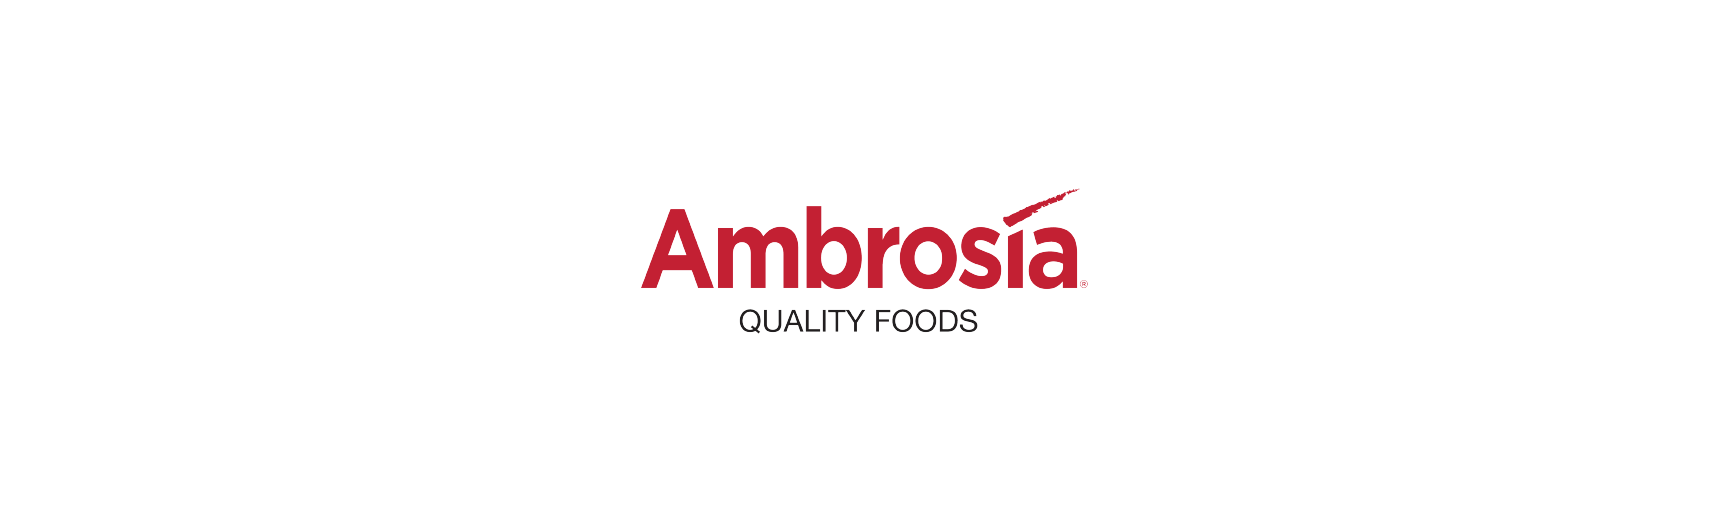 Ambrosia Products | Ginsberg's Foods